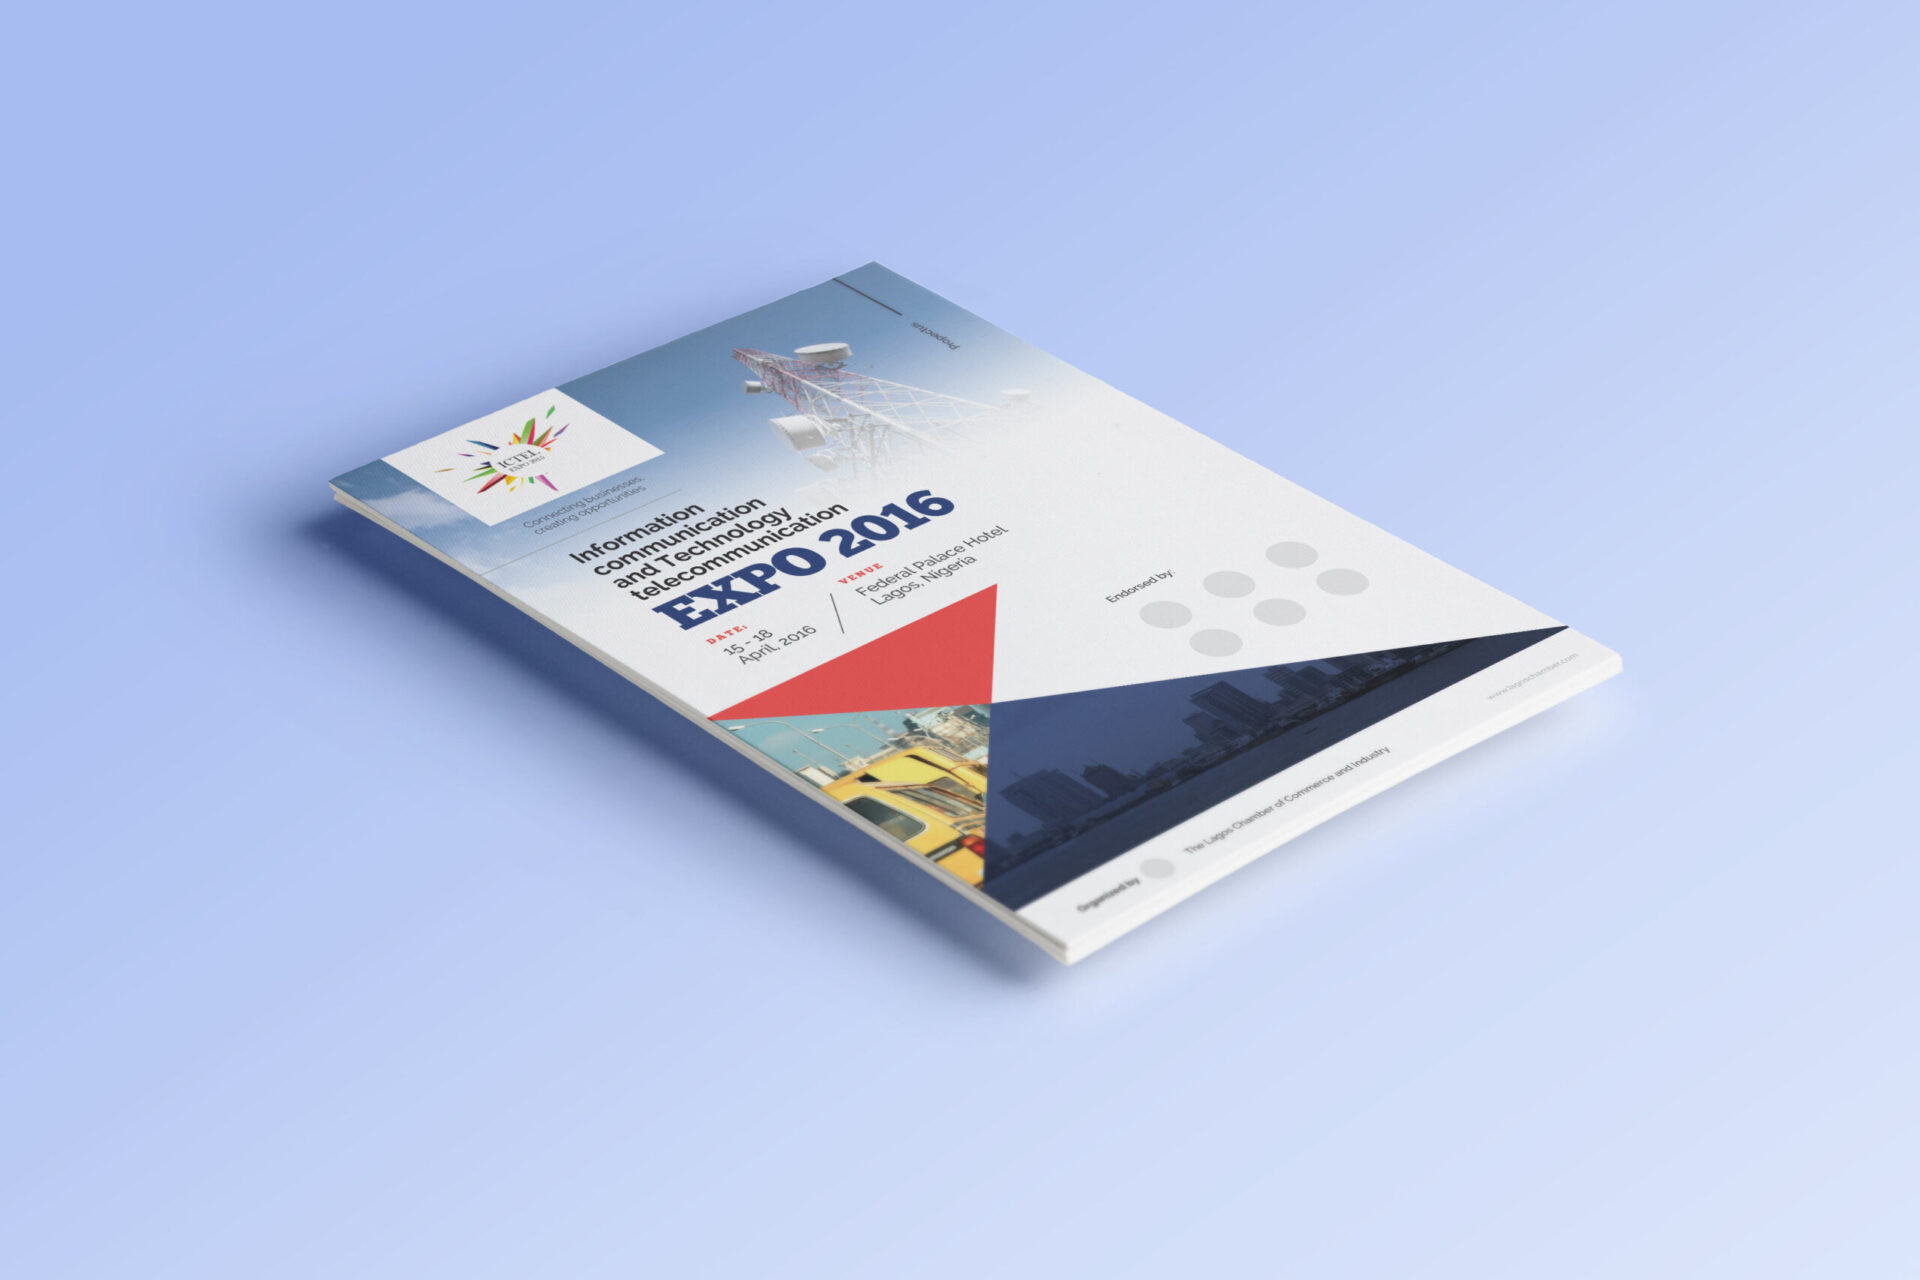 Lagos chamber of commerce ebook